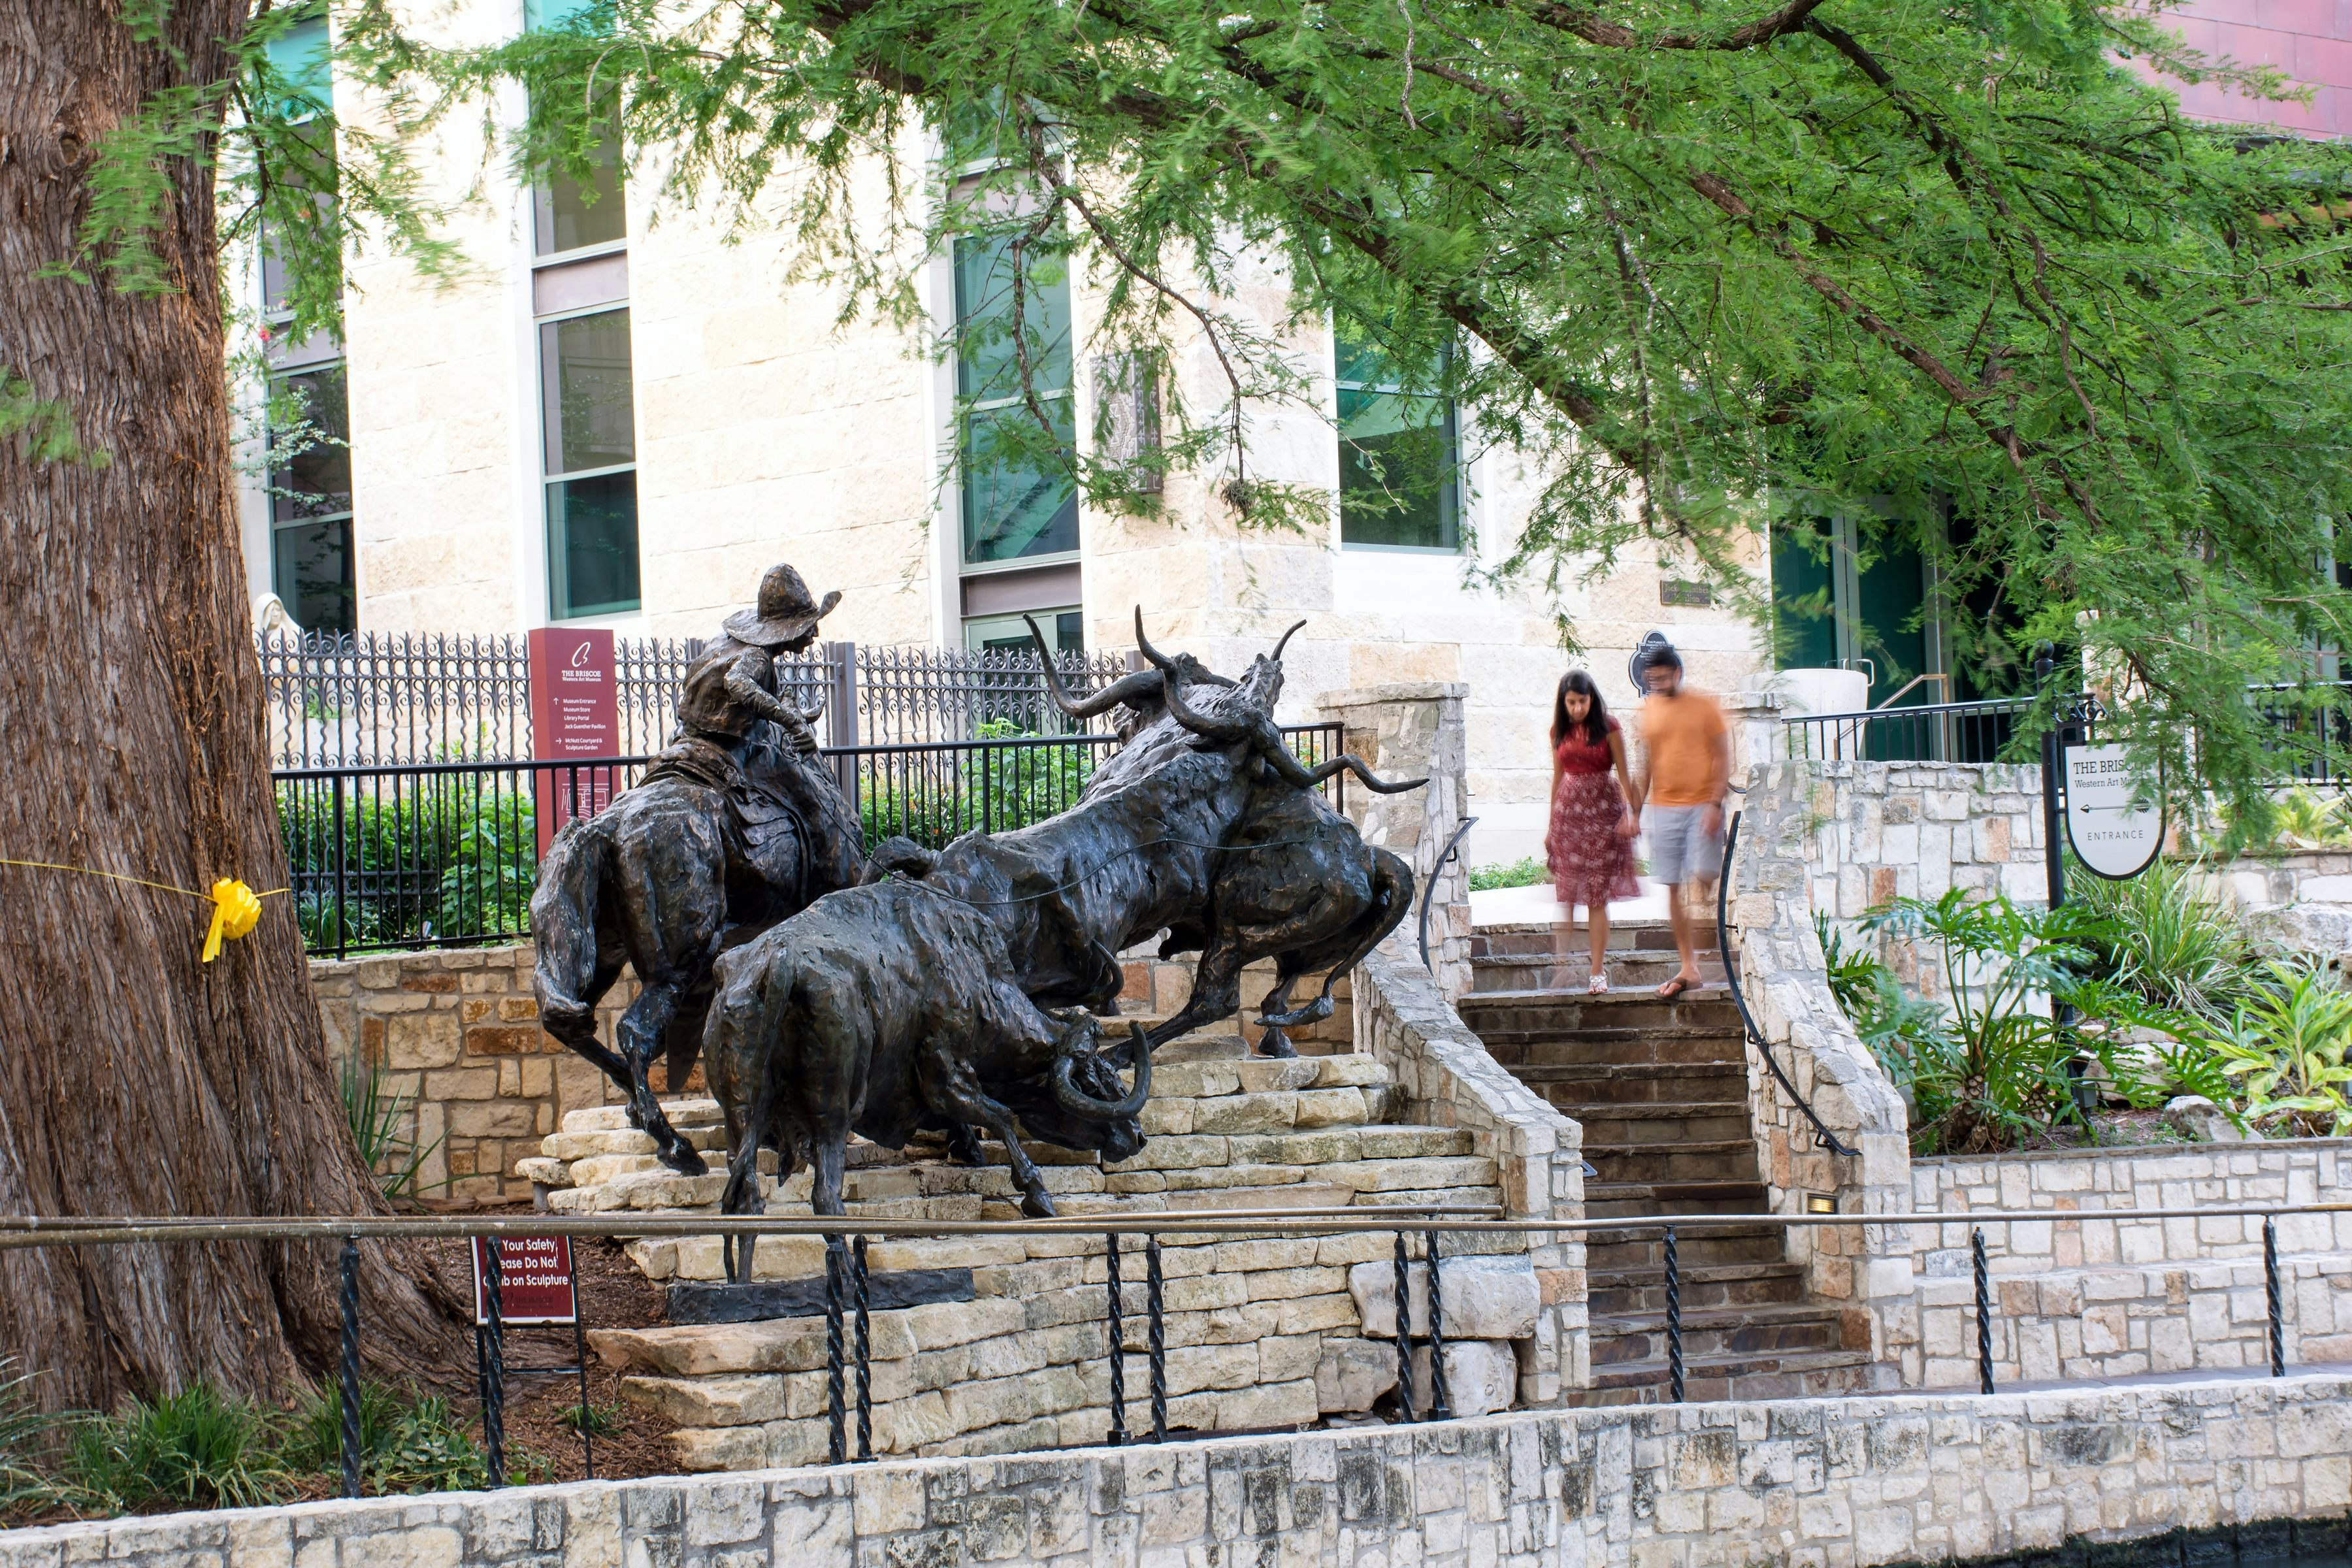 San Antonio, TX/USA- May 18 2019: "Coming Home to the Briscoe" is a statue by artist T.J.Kelsey outside the Briscoe Western Art Museum along the San Antonio River Walk, San Antonio, Texas.; Shutterstock ID 1444943180; your: Bridget Brown; gl: 65050; netsuite: Online Editorial; full: POI Image Update